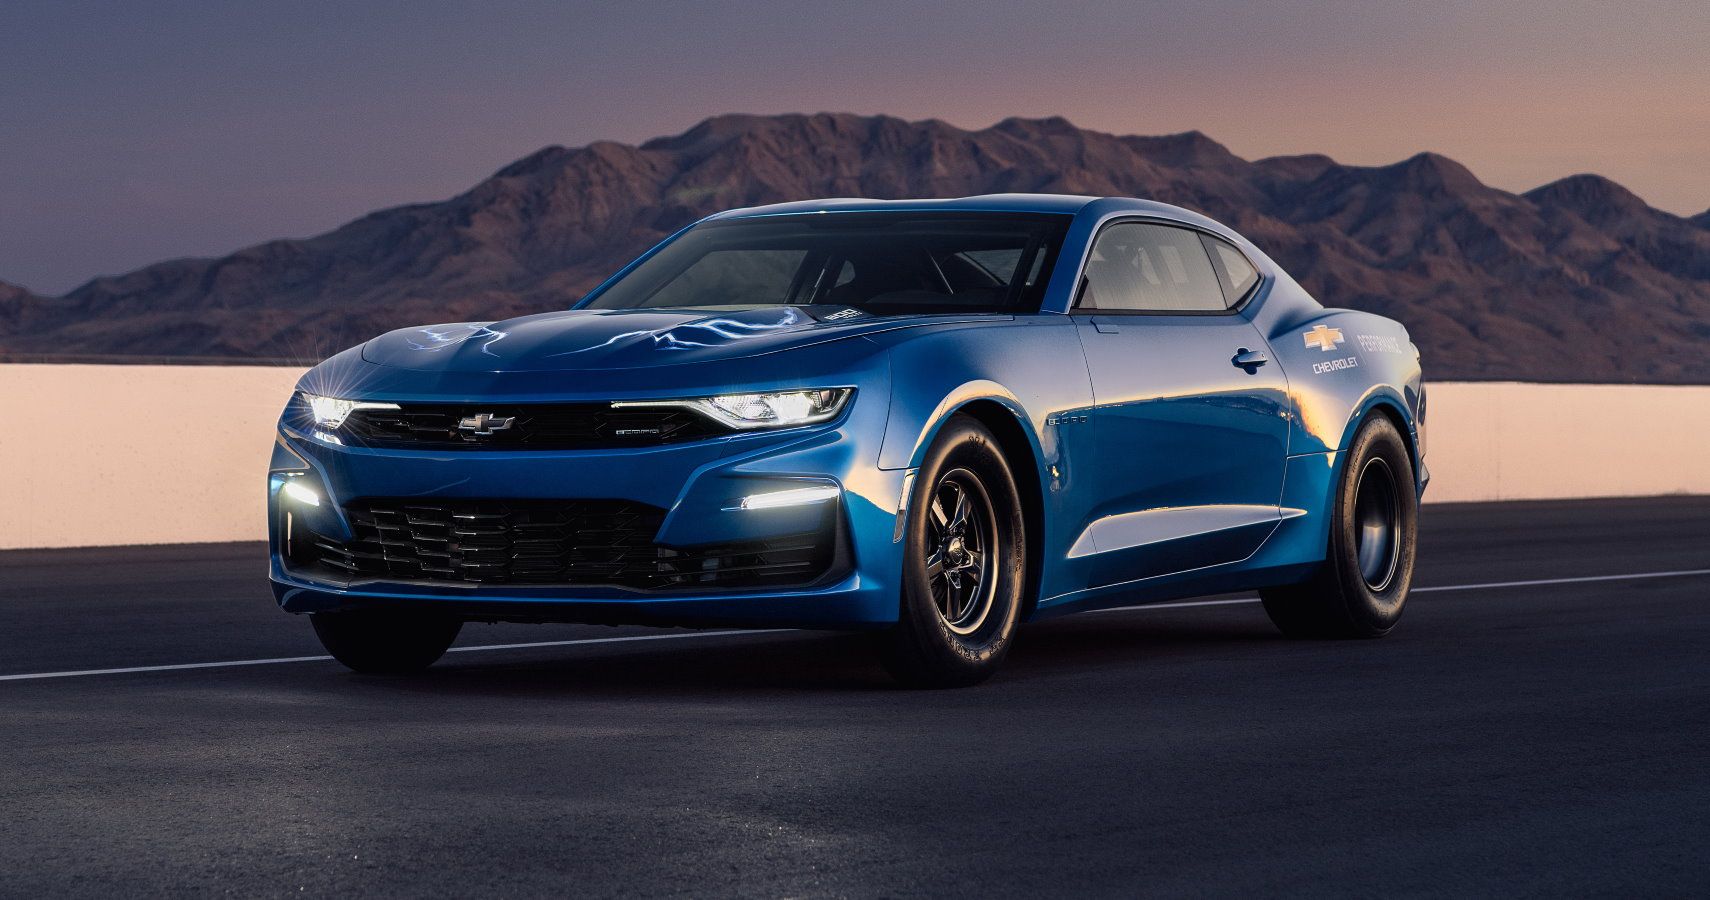 The eCOPO Camaro Concept offers an electrified vision of drag racing, with an electric motor and GM???s first 800-volt battery pack replacing the gas engine, enabling 9-second quarter-mile times.